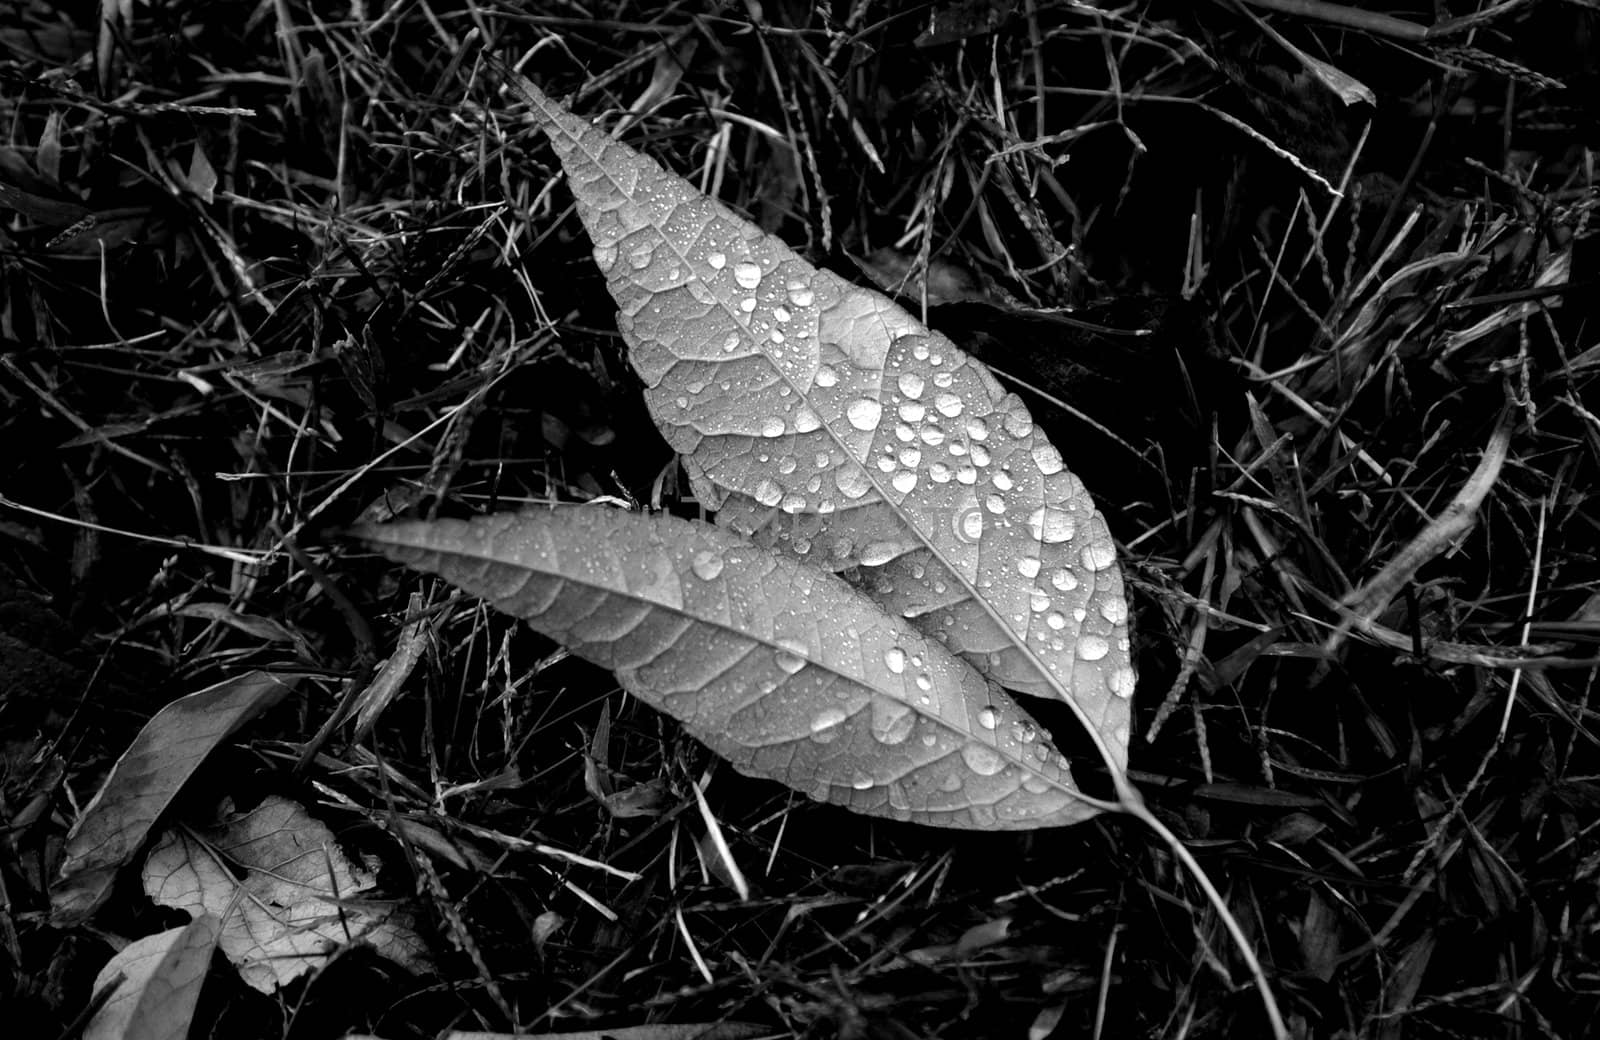 Morning dew on a leaf laying in midday.